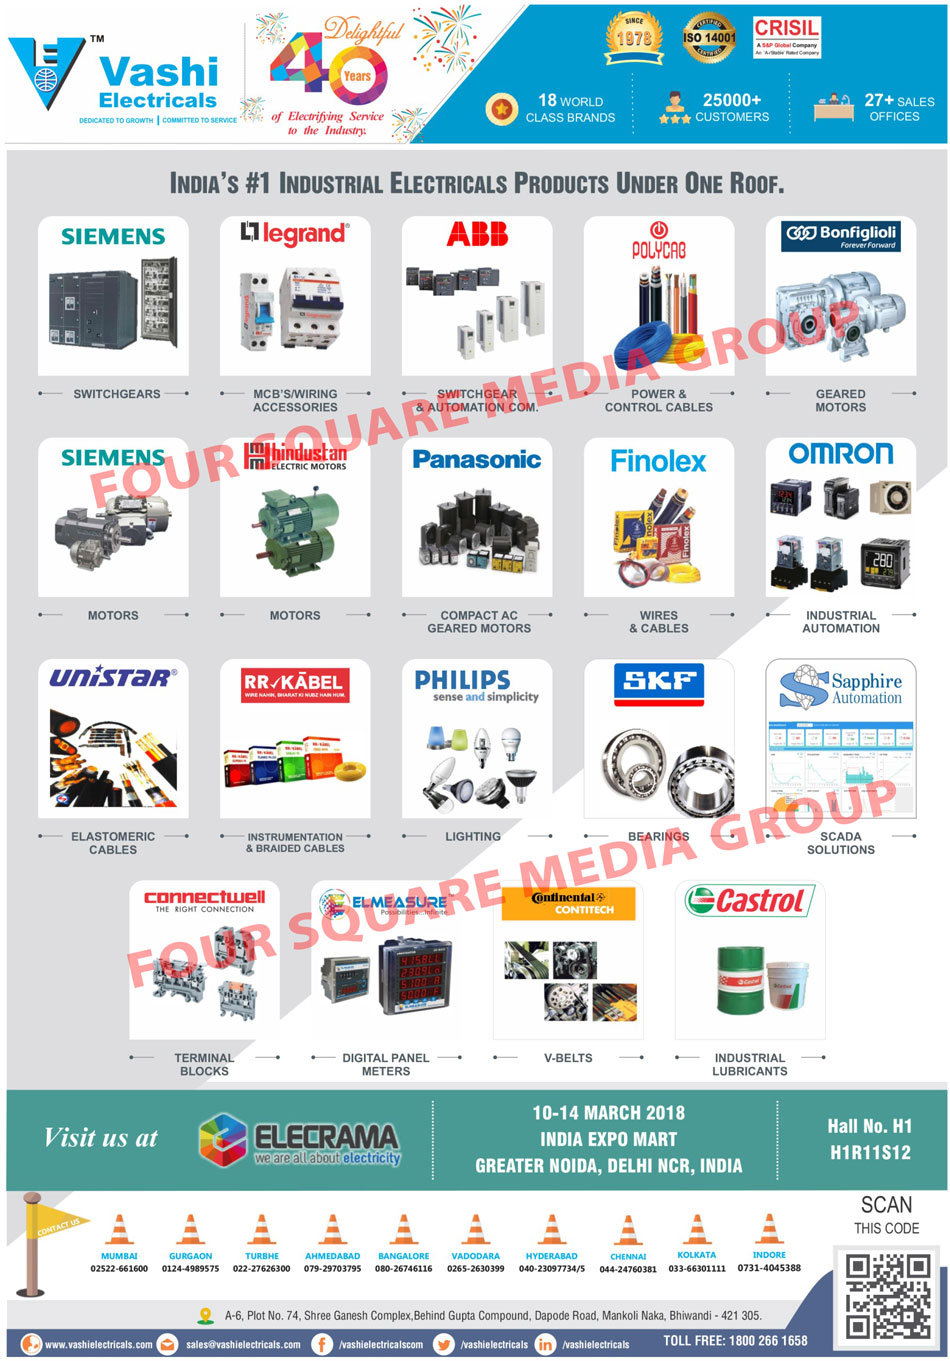 Switchgear, Geared Motors, MCBs, Wiring Accessories, Electric Motors, Active Harmonic Filters, Elastomeric Cables, Industrial Lubricants, Power Tools, Compact Ac Geared Motors, Lighting, Terminal Blocks, Wires, Cables, Fuses, Compact Modular Fuses, Photovoltaic Fuses, Low Voltage Fuses, Medium Voltage Fuses, Ammeters, Voltmeters, VAF Meters, Load Managers, Energy Meters, Dual Source Energy Meters, Generator Monitoring Units, Data Loggers, High Profile Power Analysers, Intelligent Earth Leakage Relays, IELR, Intelligent Power Factor Controllers, IPFC, Industrial Lights, High Bay Lights, Well Glass Lights, Bulk Head Lights, Outdoor Lights, Flood Lights, Street Lights, Post Top Lights, Bollards, Master Led Spot MV, Solar Power Solutions, Solar Street Lights, Solar Water Heaters, Solar Thermal Water Heaters, Solar PV System Integration, Drives, Power Cables, Control Cables, Instrumentation Cables, Braided Cables, Rolling Bearings, Digital Panel Meters, Industrial Automation